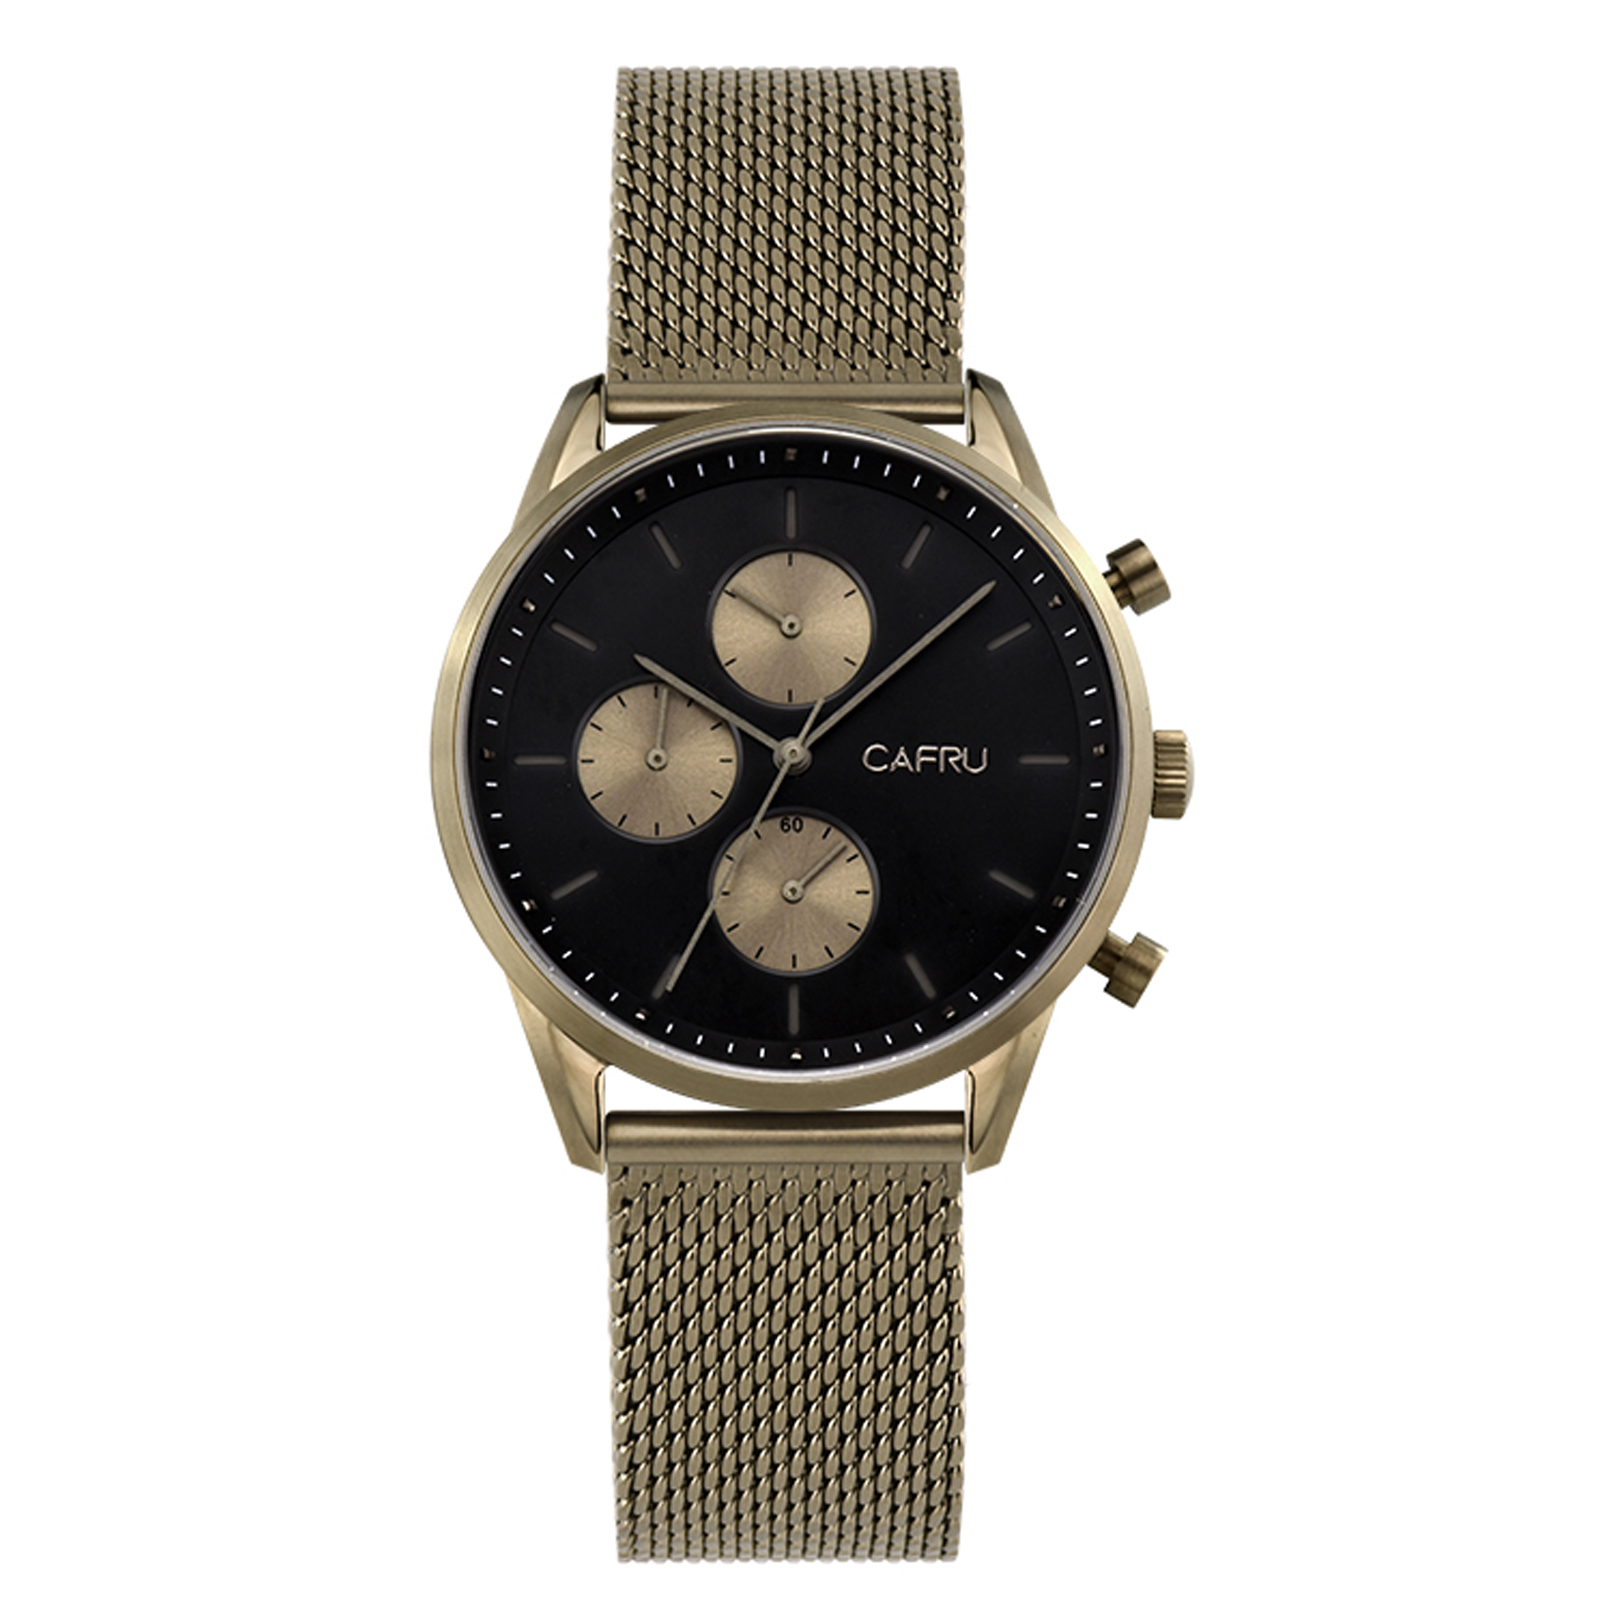 Khaki And Black Men's Watch With Stainless-Steel Mesh Band